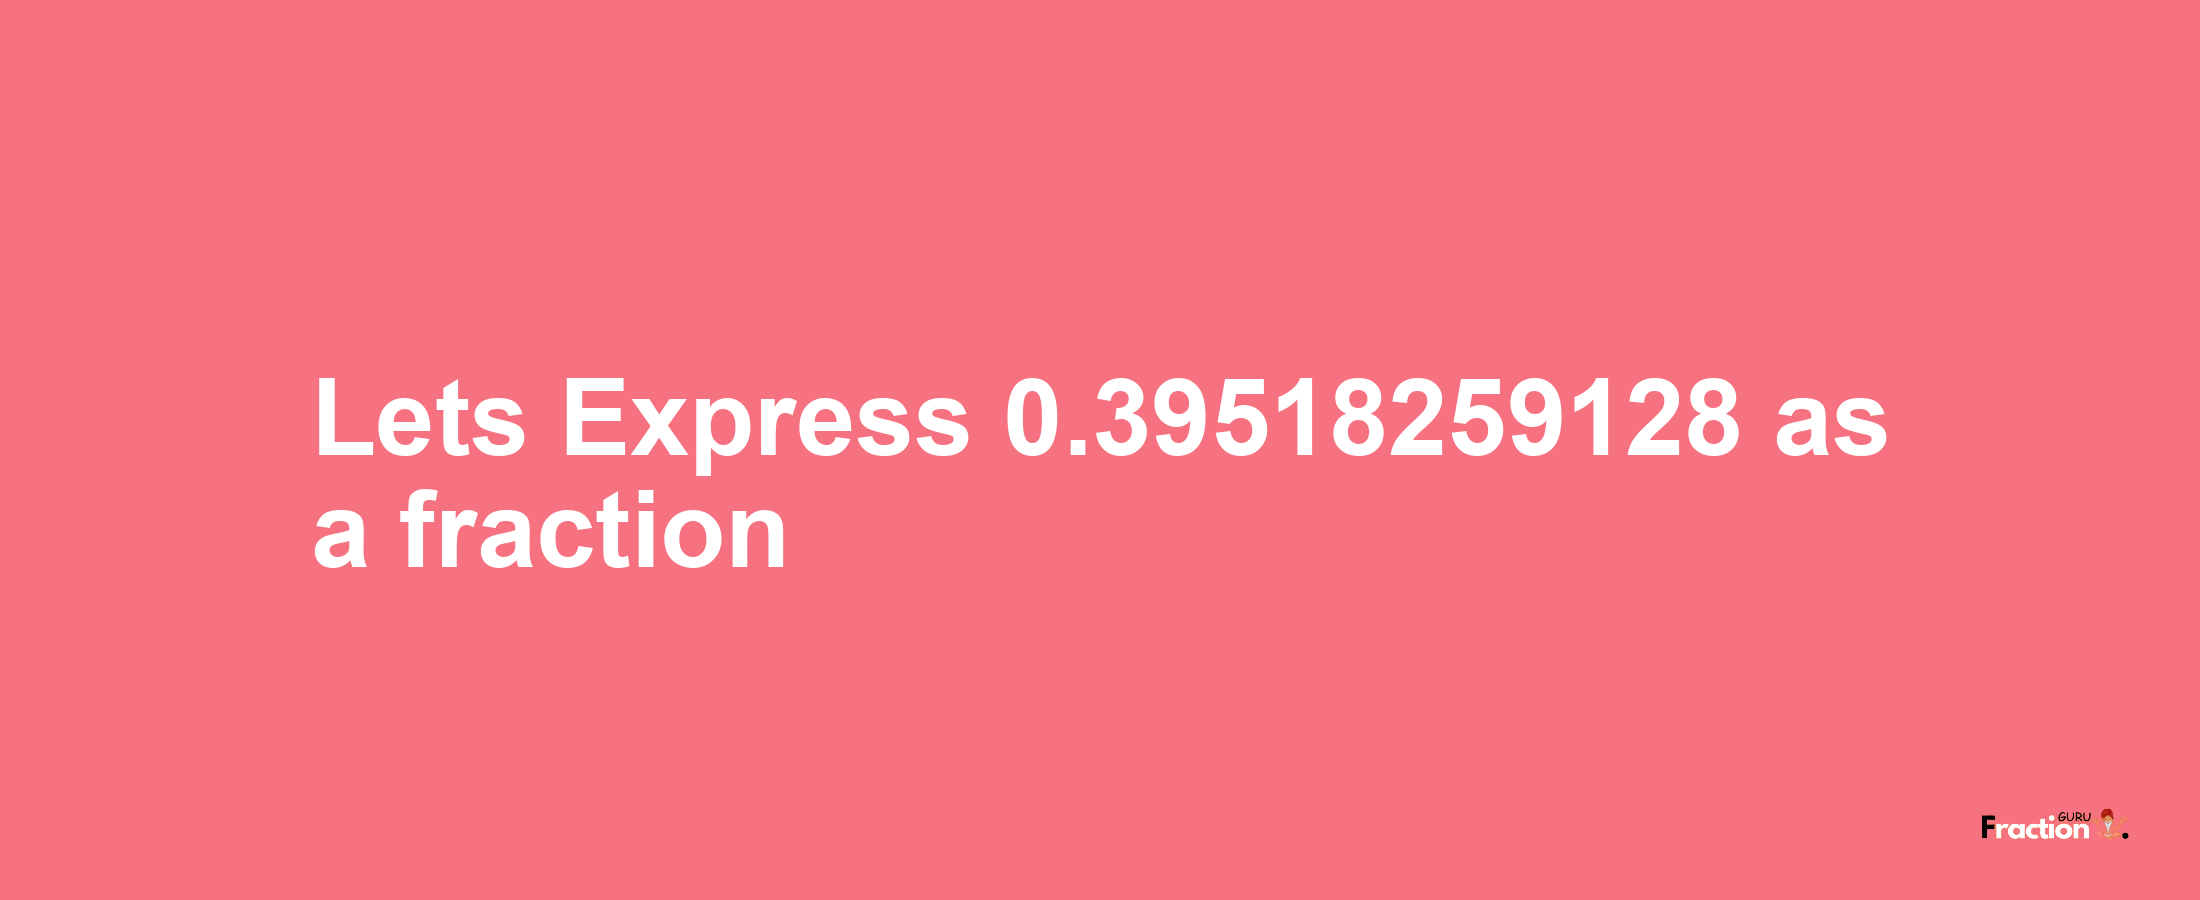 Lets Express 0.39518259128 as afraction